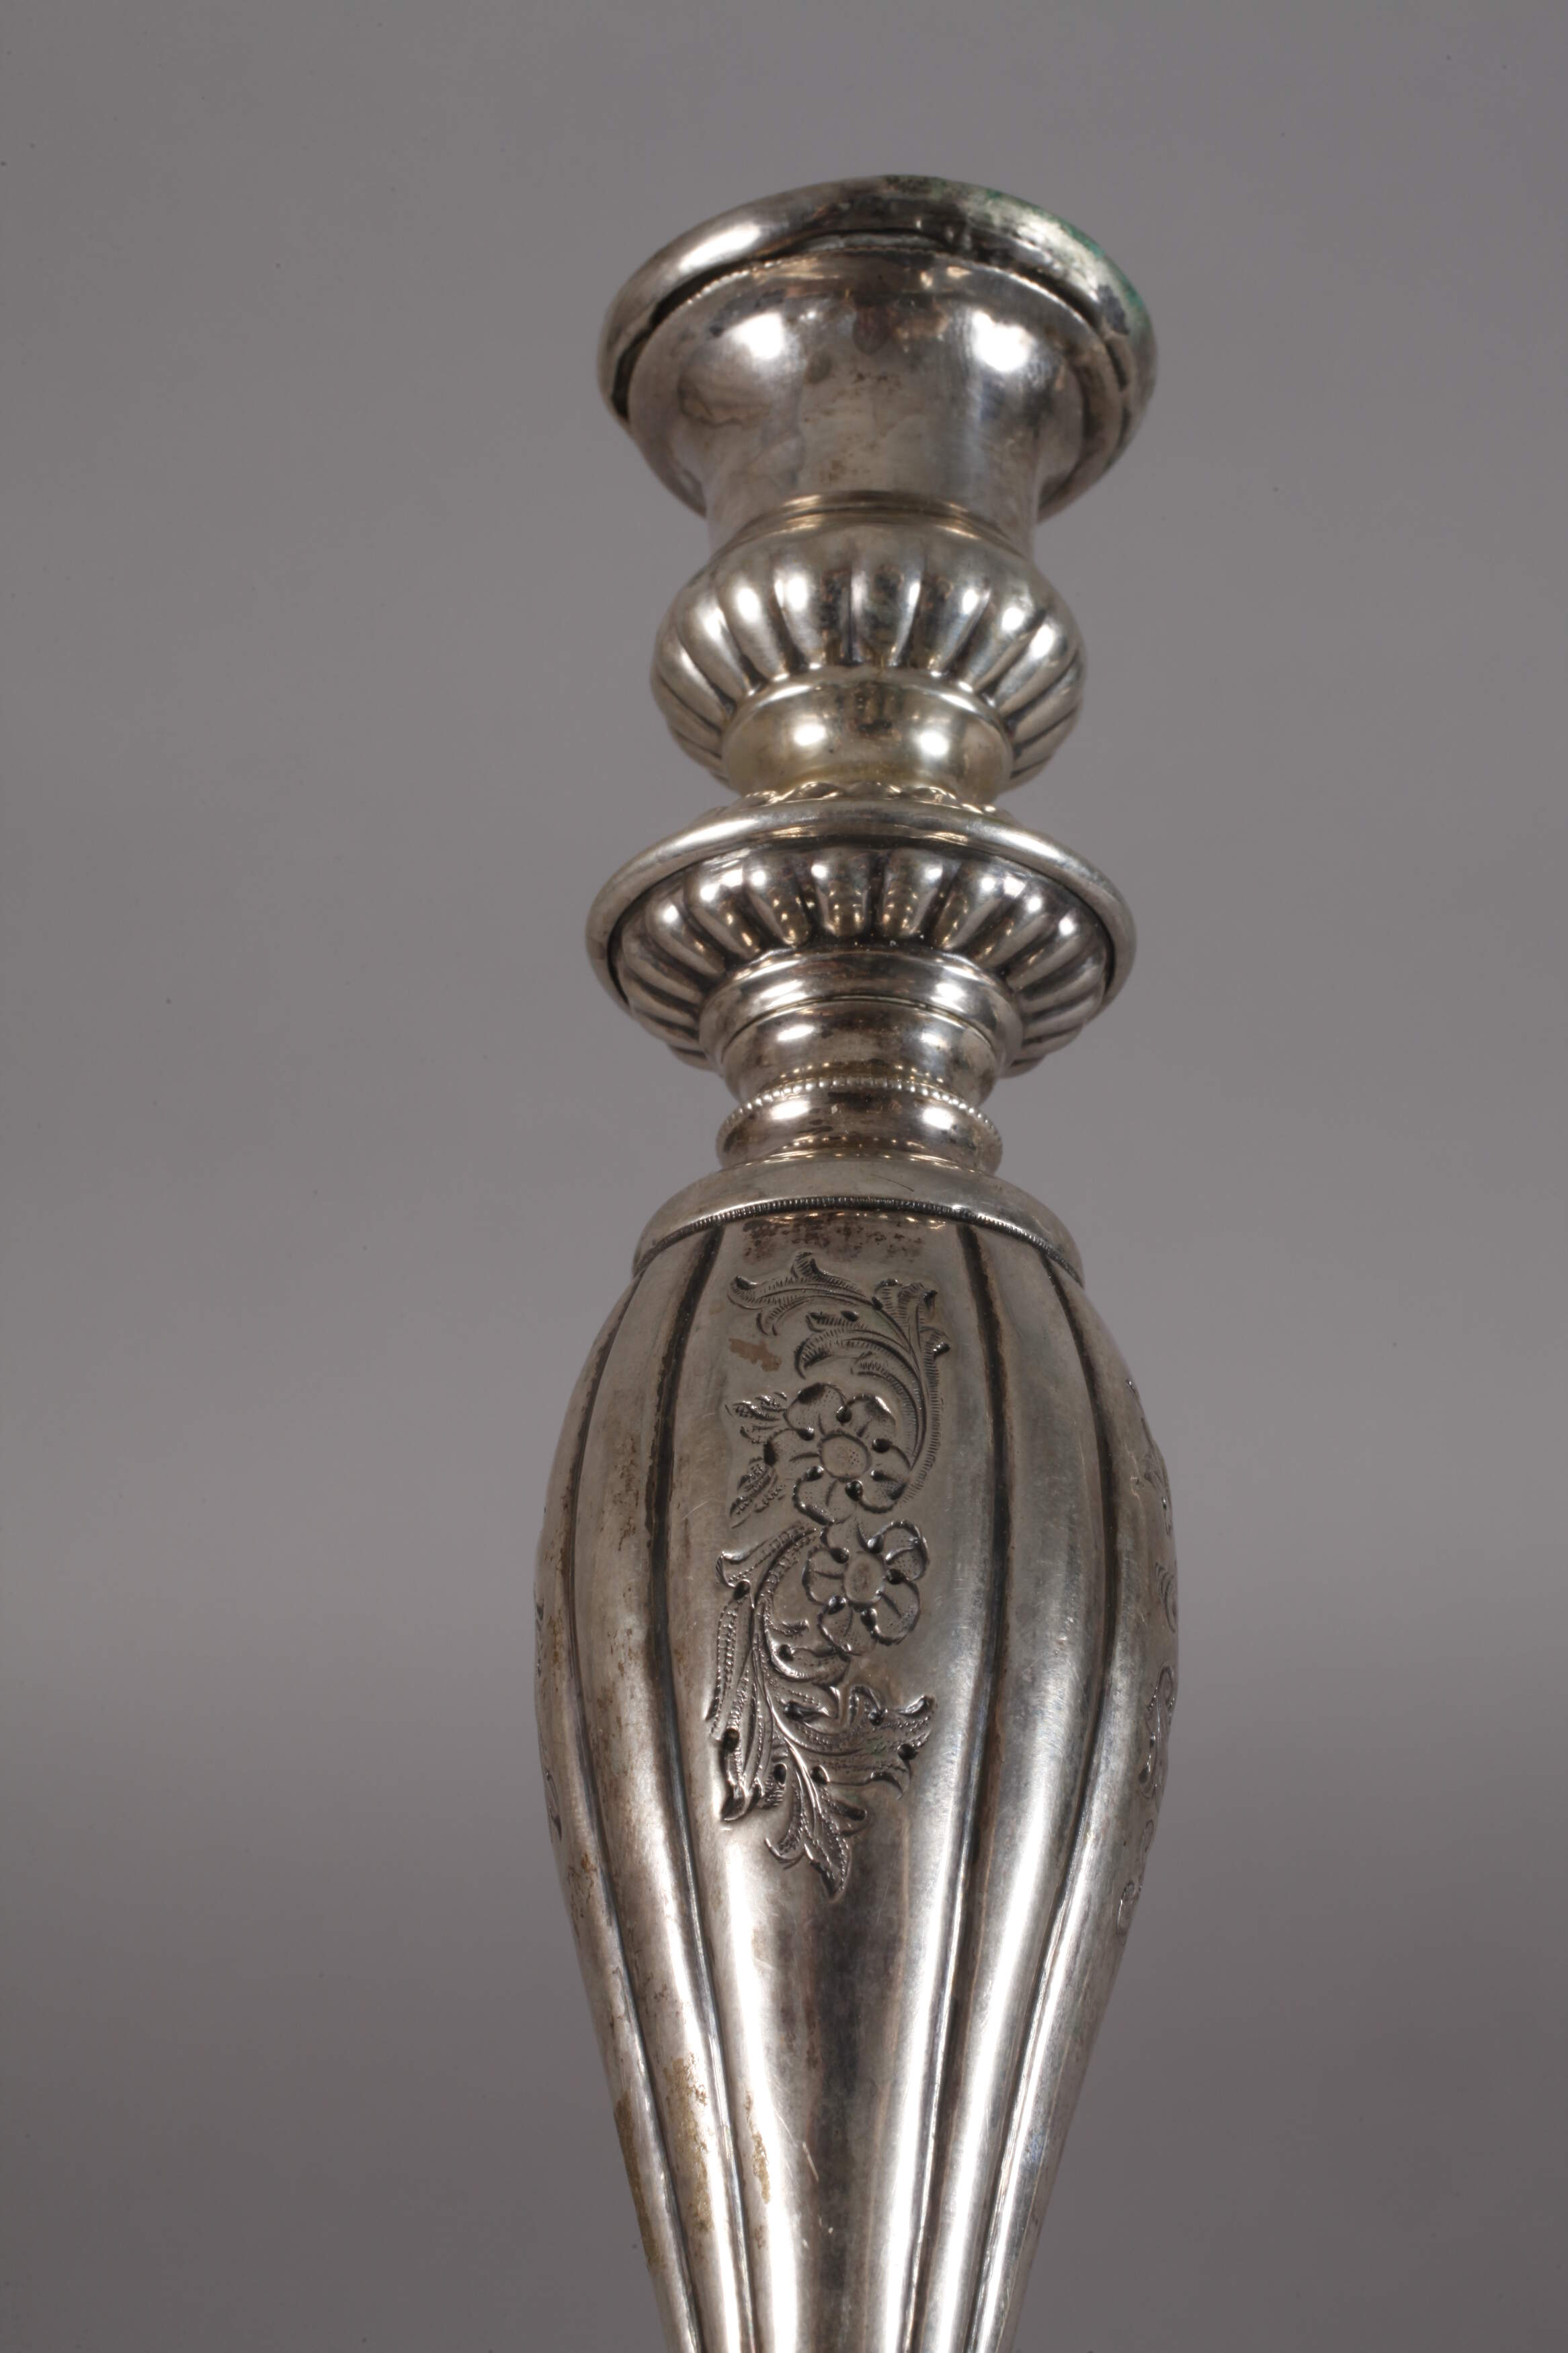 Silver candlestick Berlin - Image 2 of 4